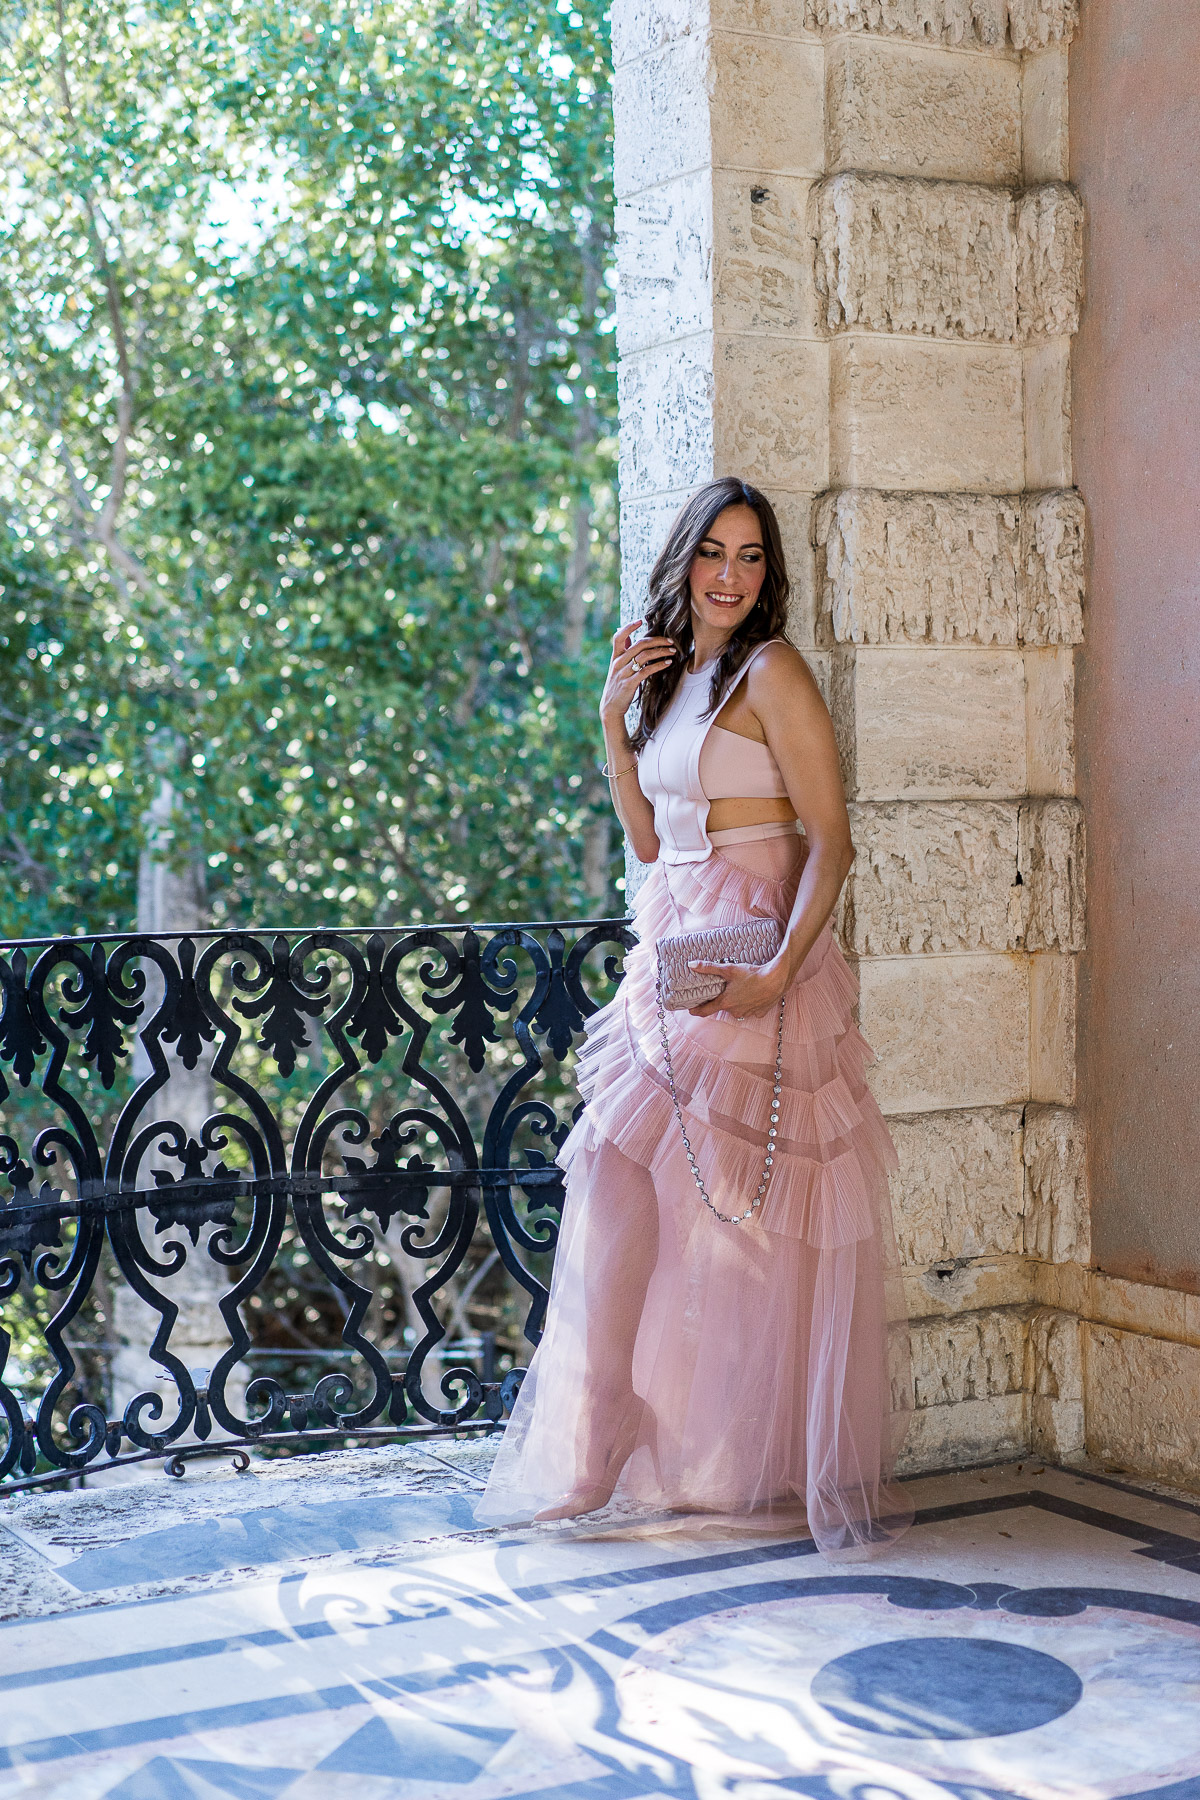 Blogger Amanda from A Glam Lifestyle enjoys Viscaya Gardens in Miami in a dreamy BCBG blush tulle dress